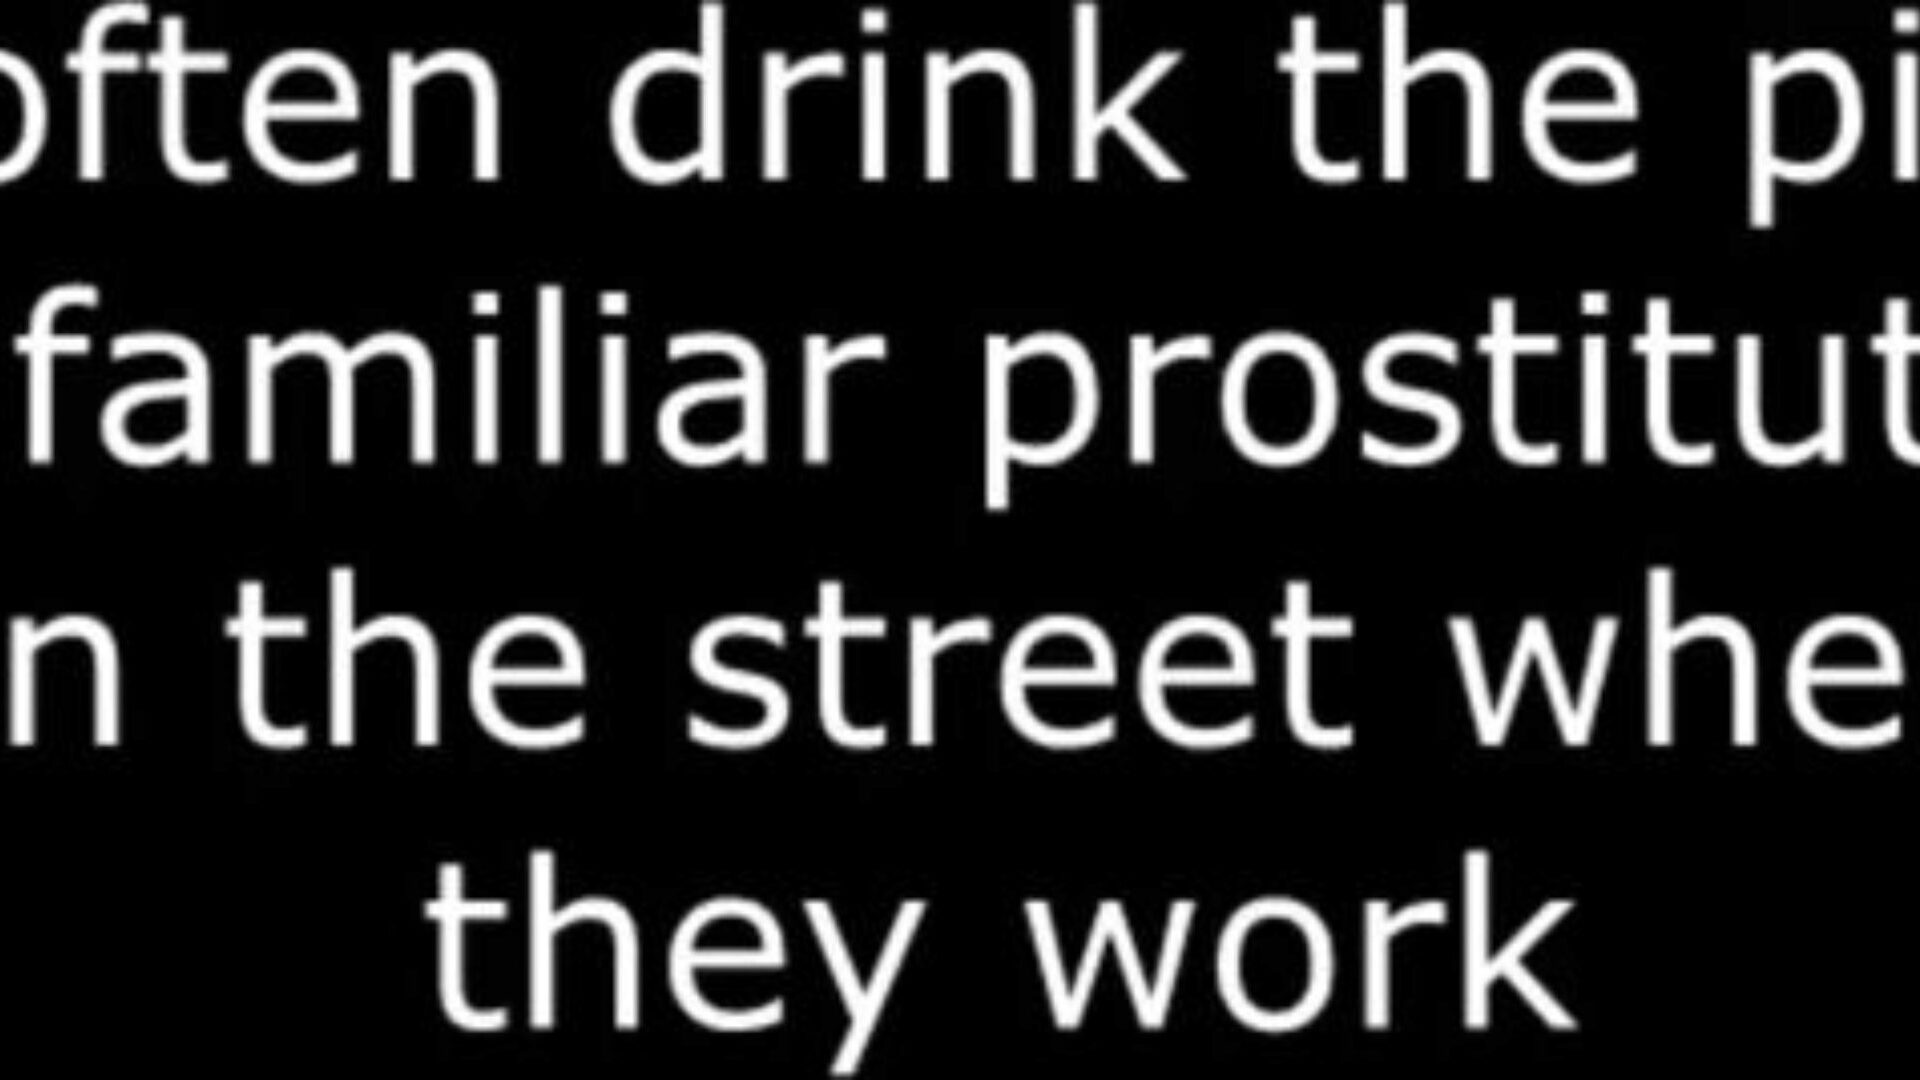 I often Rink the Void Urine of Familiar Prostitutes on the Street where they Work